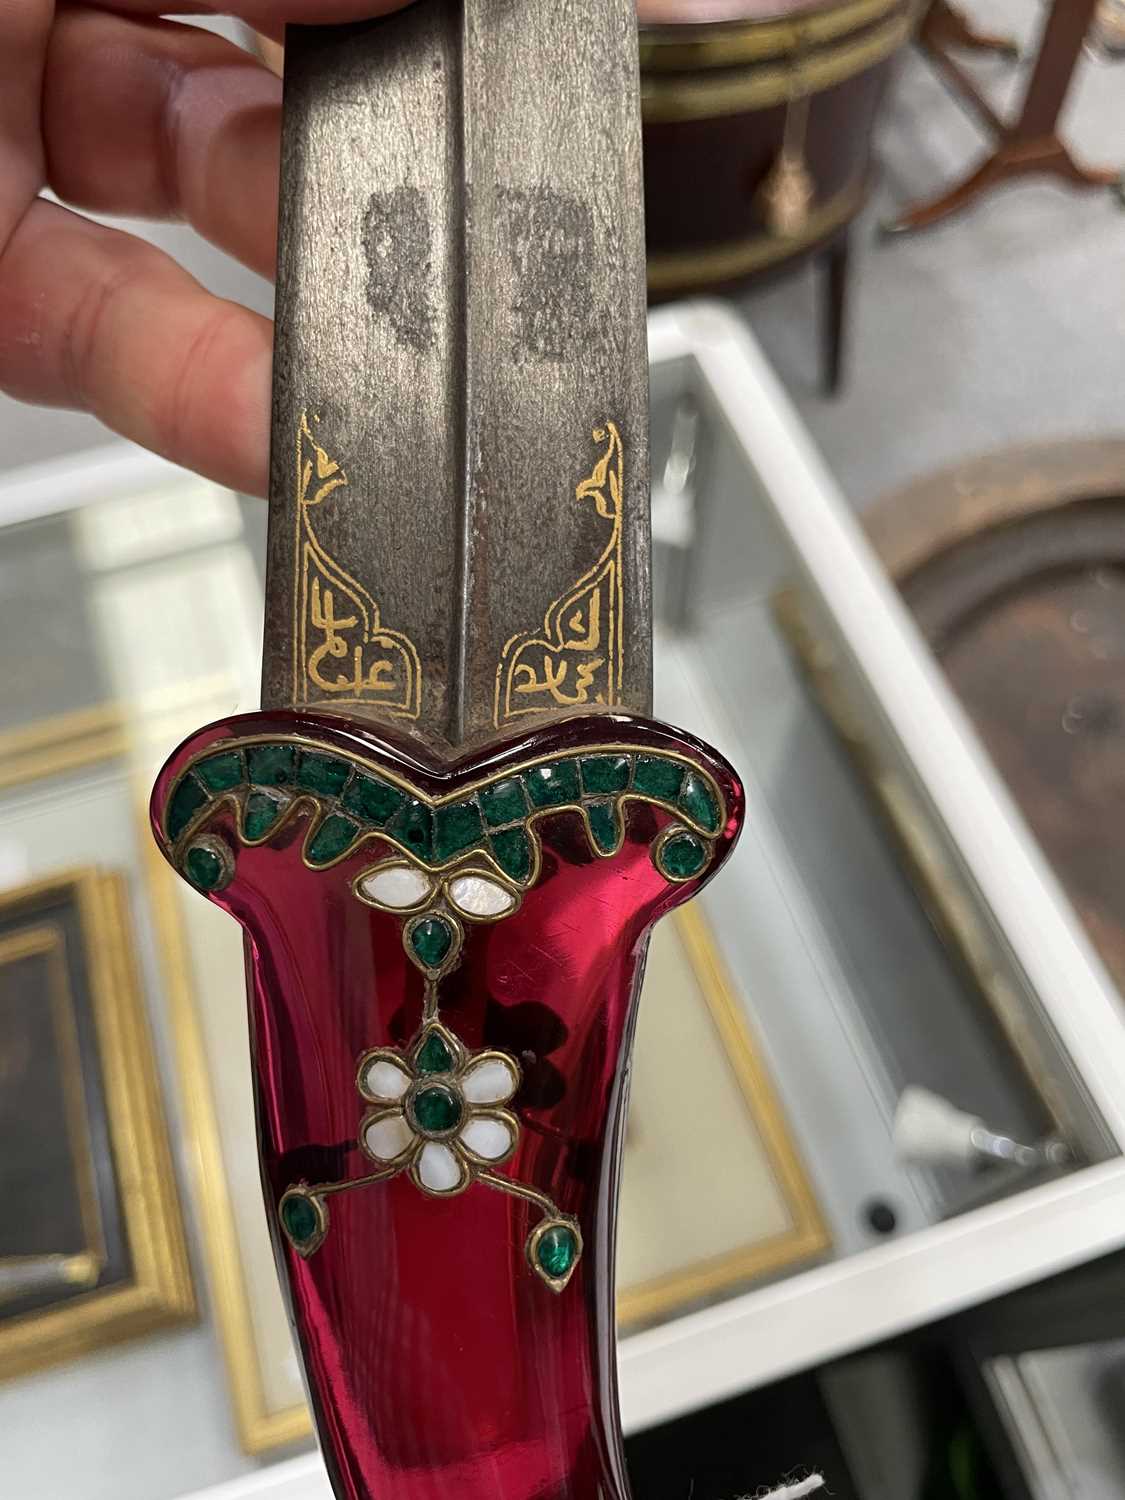 AN INLAID RED CRYSTAL-HILTED DAGGER, MUGHAL, INDIA, 18TH-19TH CENTURY - Image 10 of 15